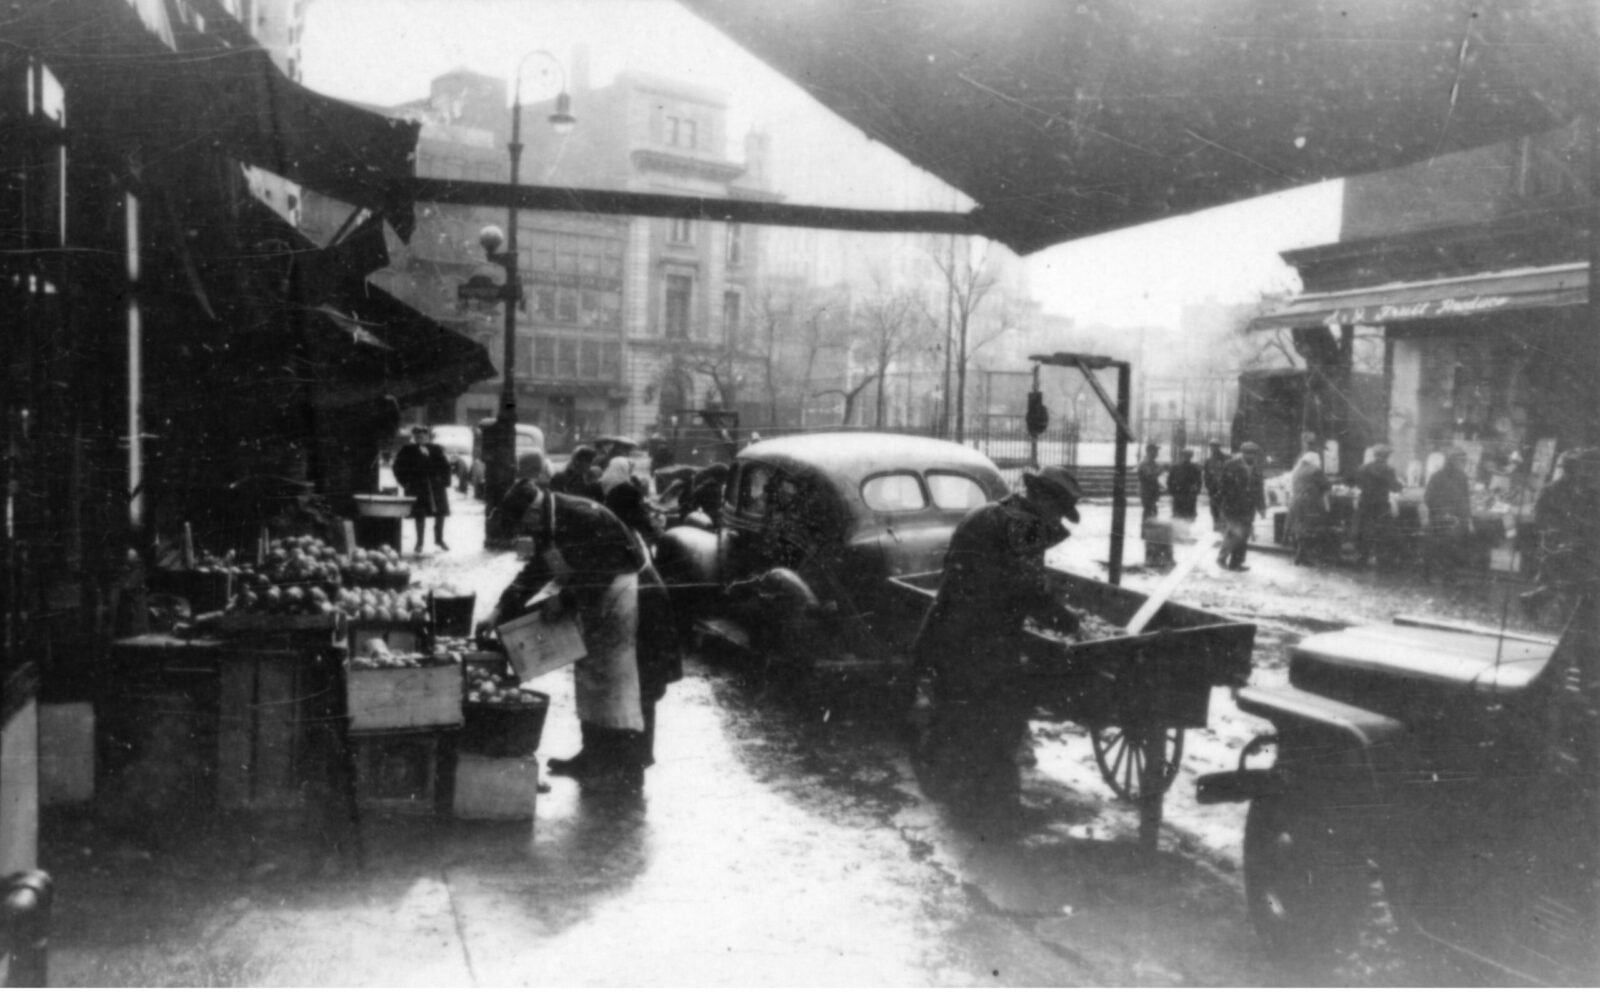 Black and white photo of the sidewalk in front of a food stand. A man in an apron is stooped over a fruit display. Another man in a hat and coat is bent over a push cart between two old cars.